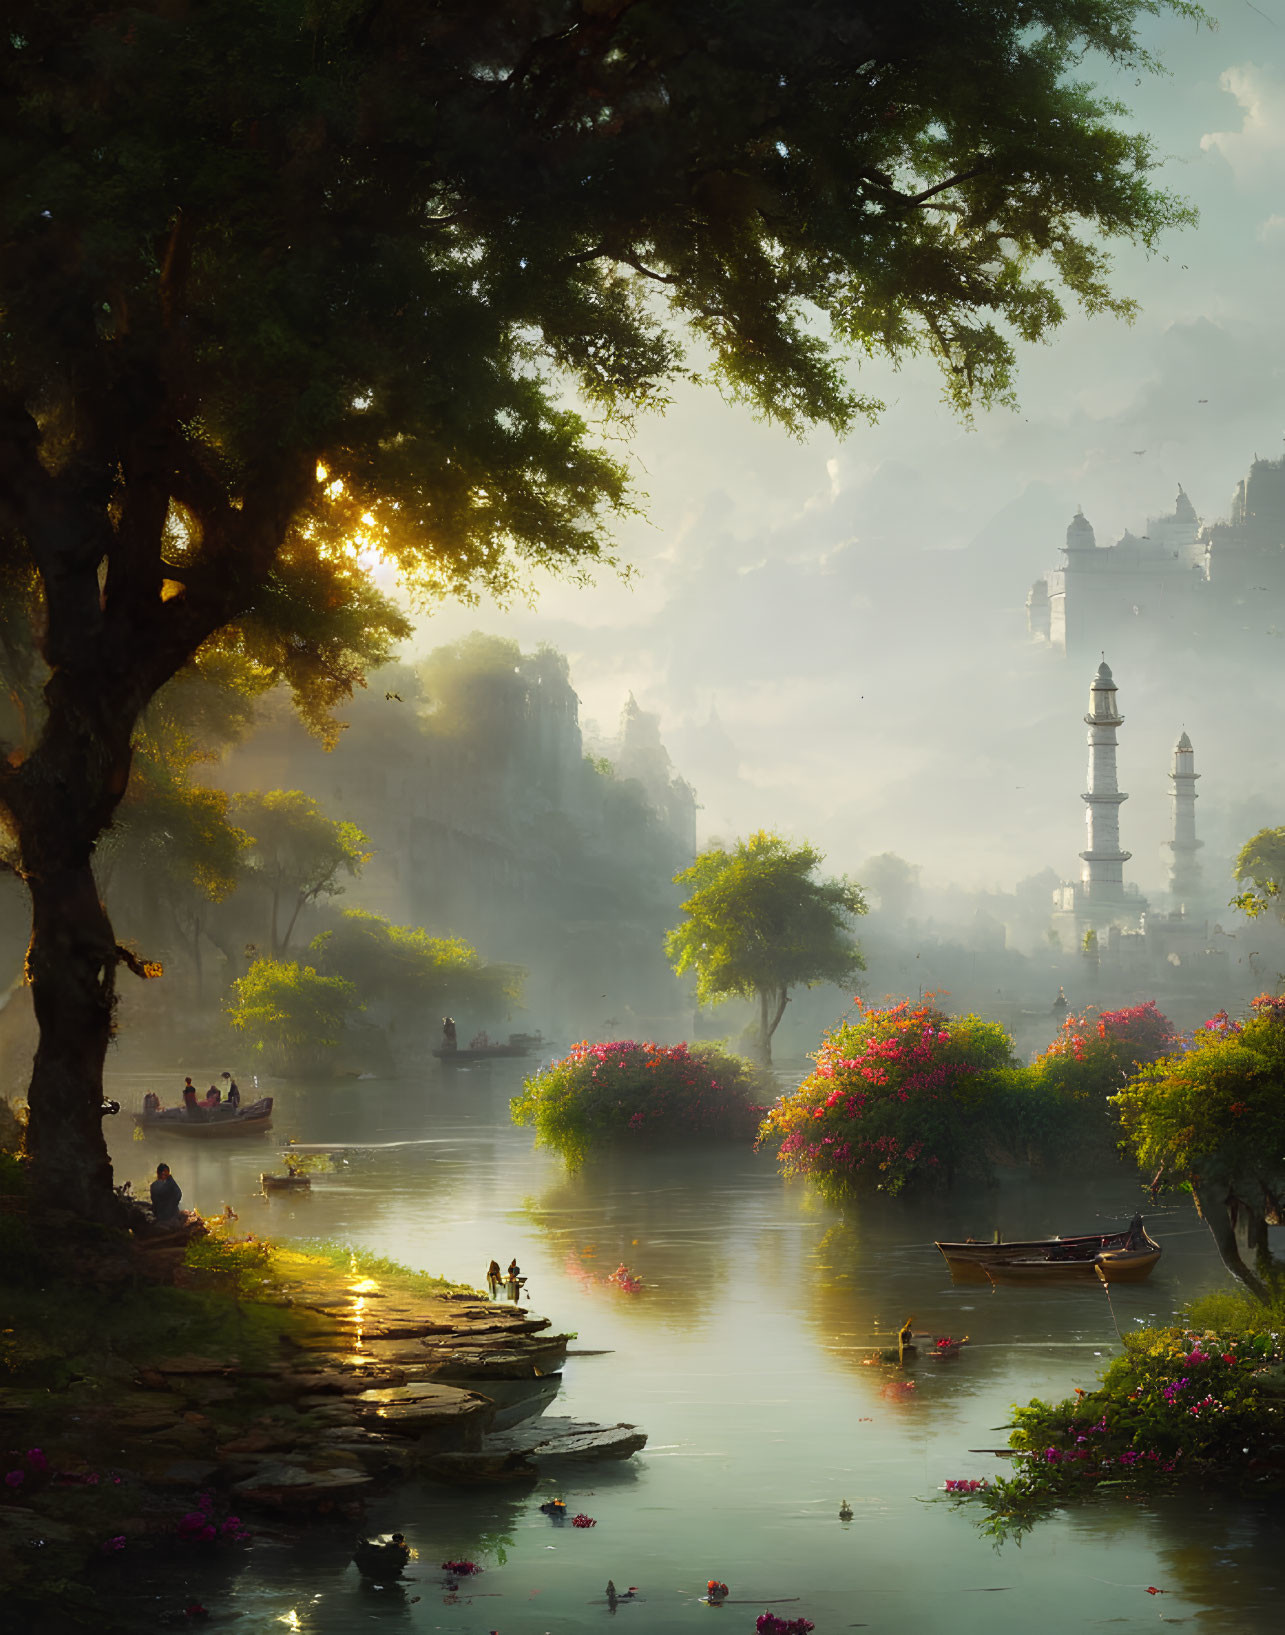 Tranquil river scene at dusk with boats, flowering trees, ancient buildings, and warm sun glow